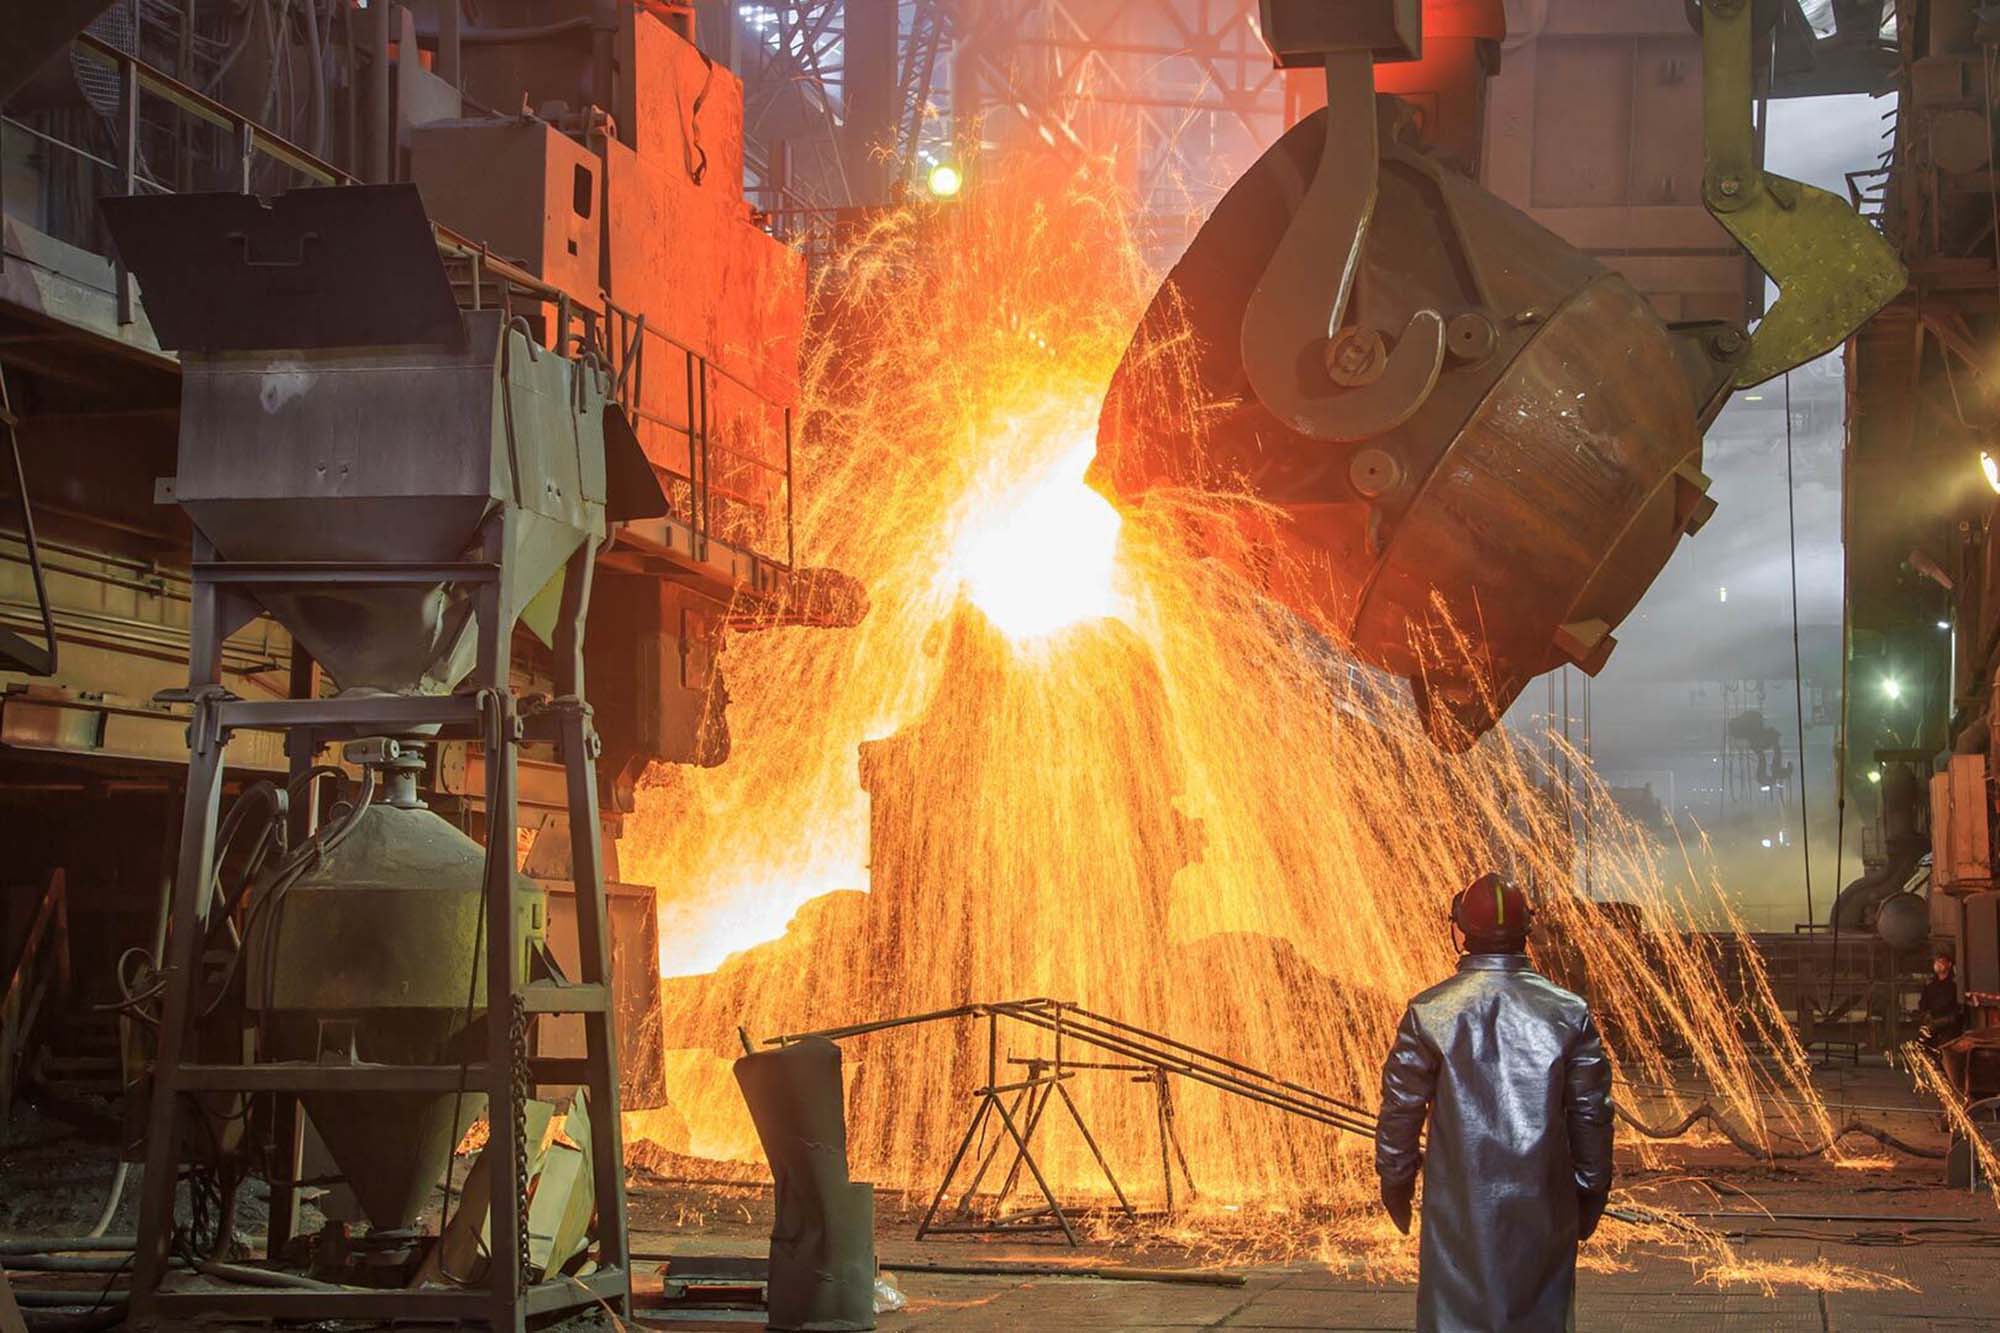 Stock image of a large vat of molten metal being poured into some kind of mold. Sparks are flying everwhere and a man in a reflective protective clothing is looking on